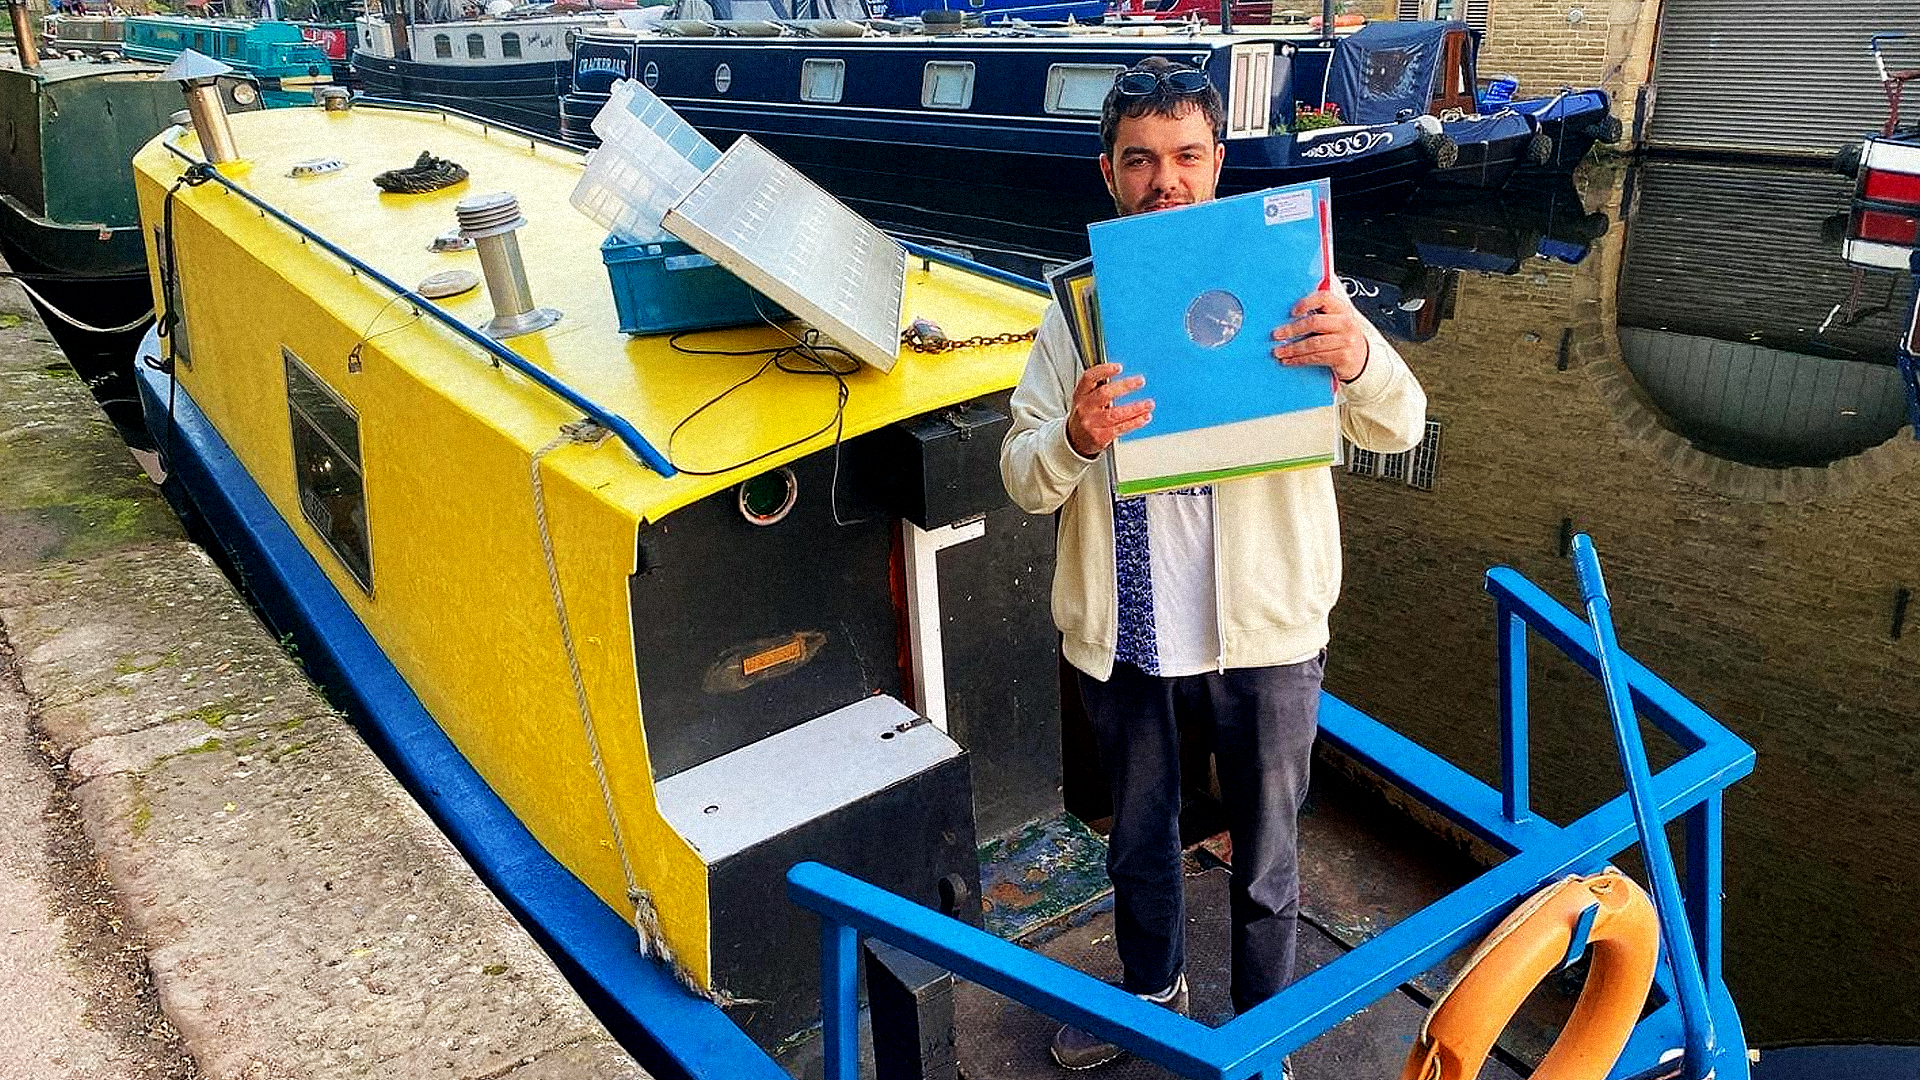 Fundraiser launched after floating shop sinks due to pollution